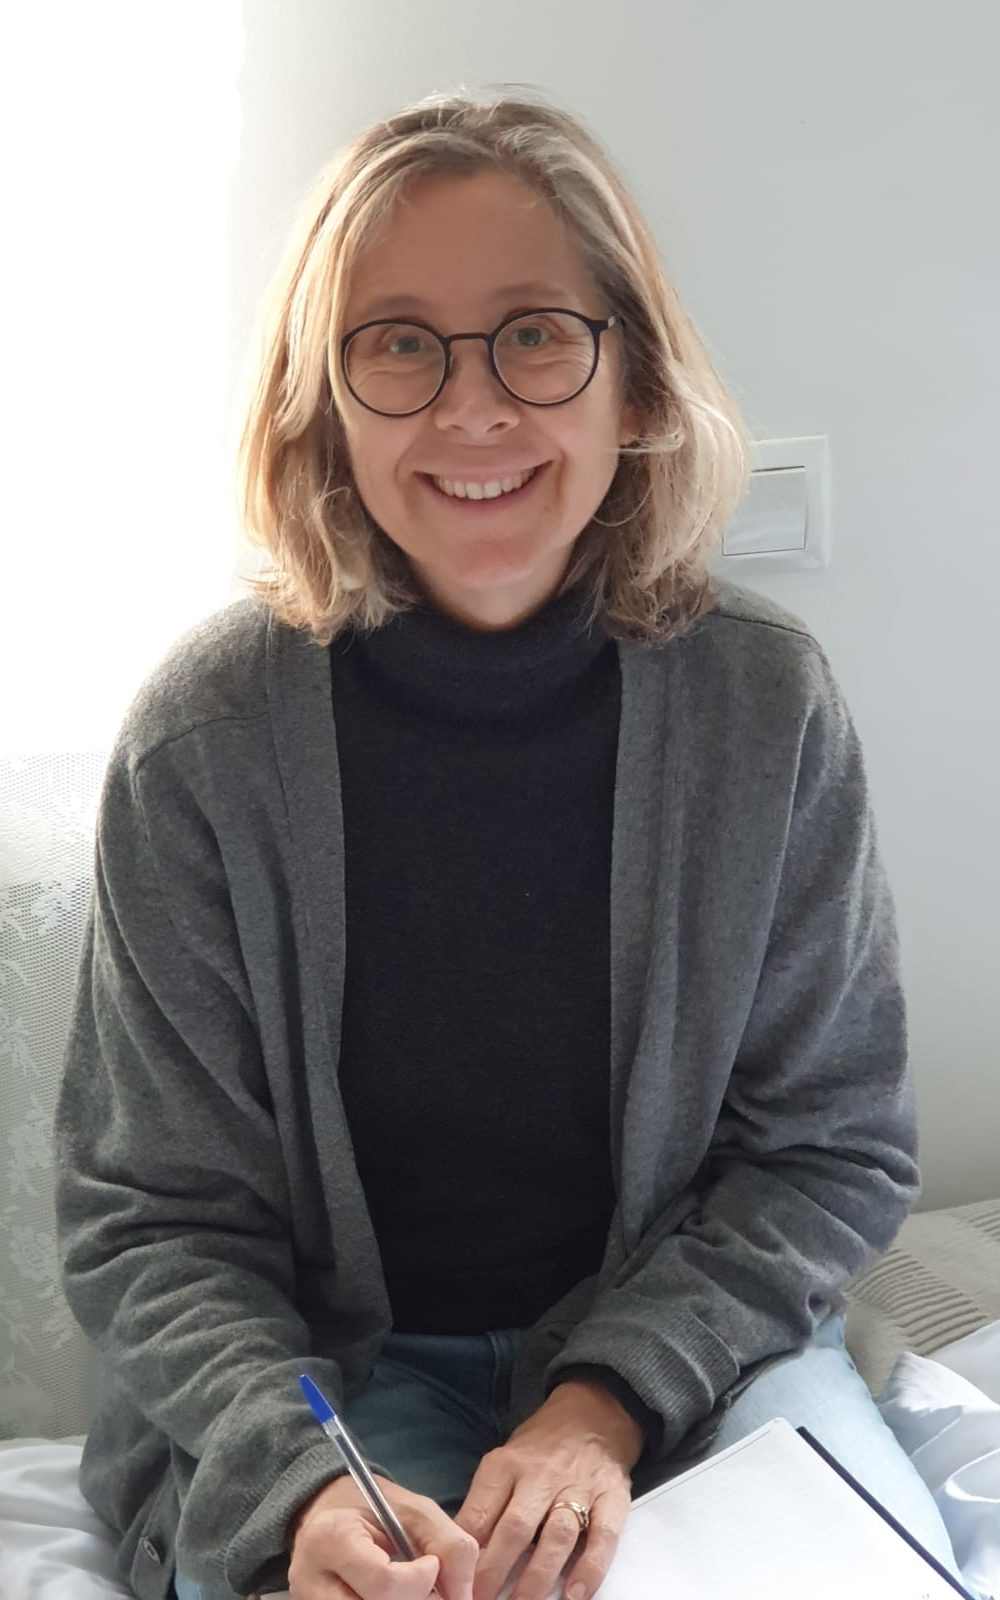 A photograph of Ruth smiling. She has long blonde hair, round glasses, and a grey cardigan.